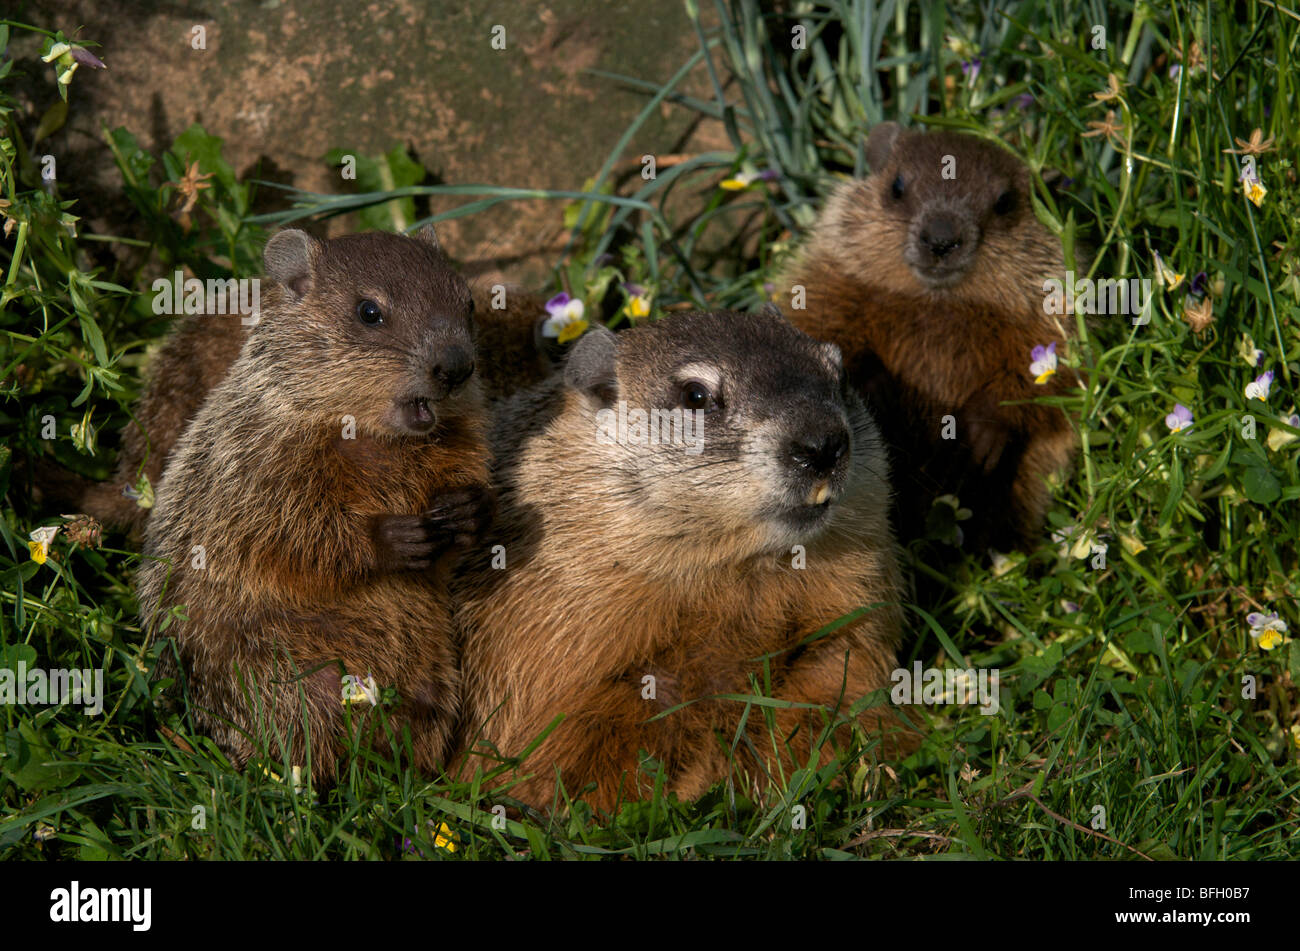 Mother and baby woodchucks ((Marmota monax) near den entrance with ...